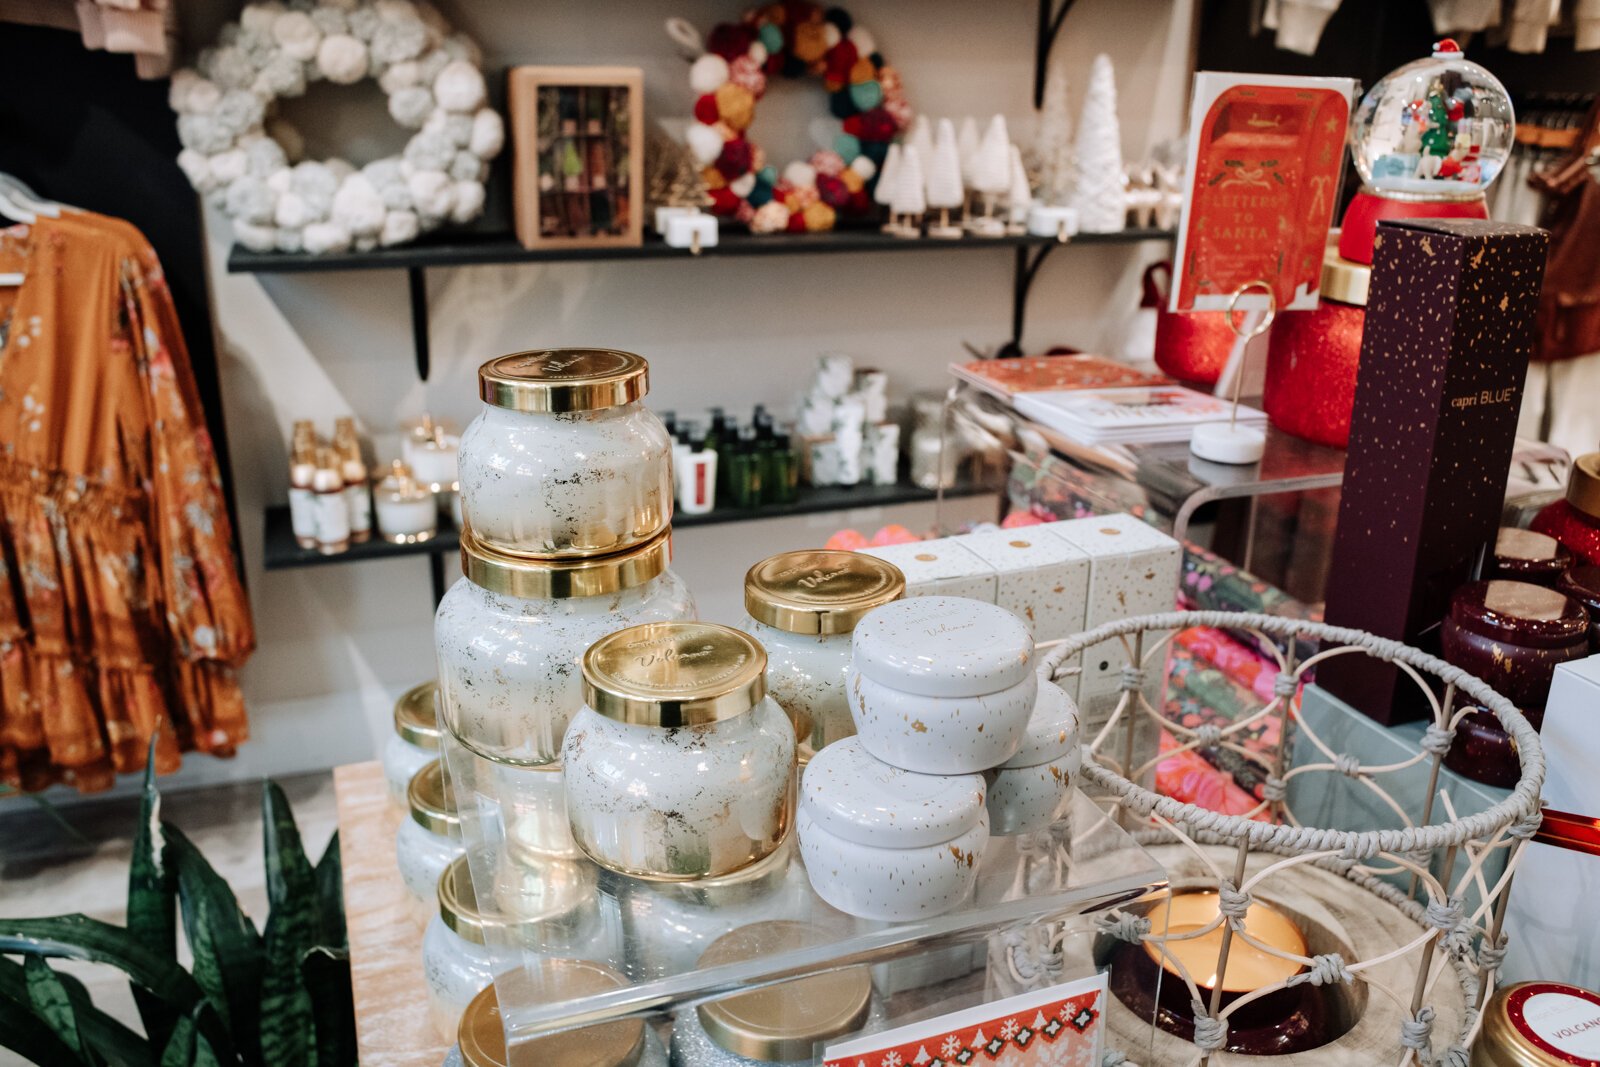 Elysian Co. at 110 E. Center St. in Warsaw features a wide variety of gift options.